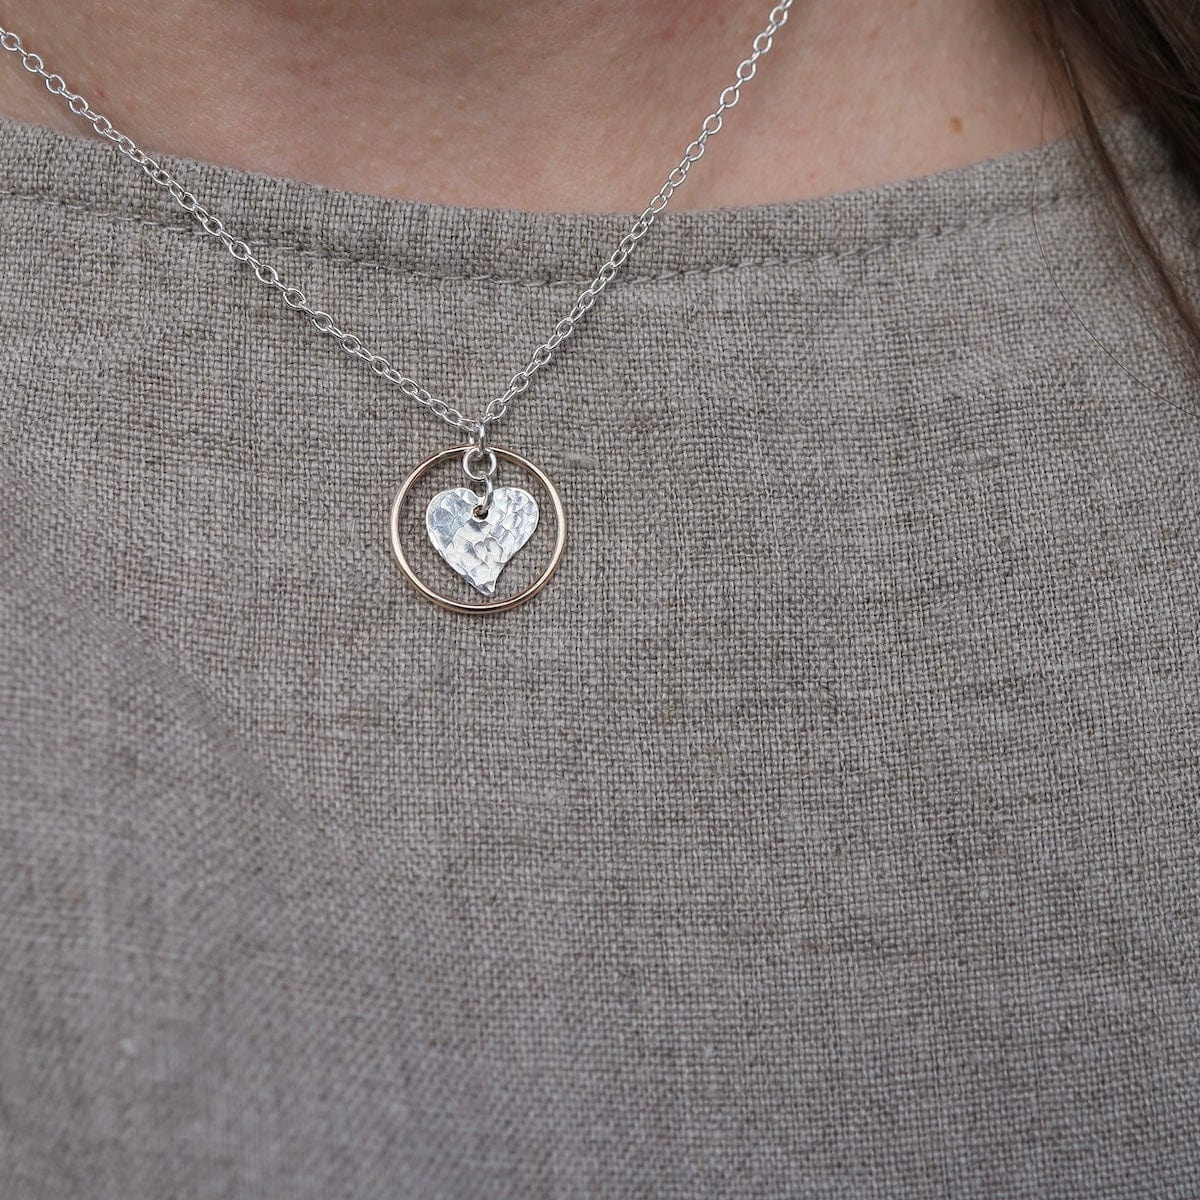 NKL Hammered Heart in Circle Necklace